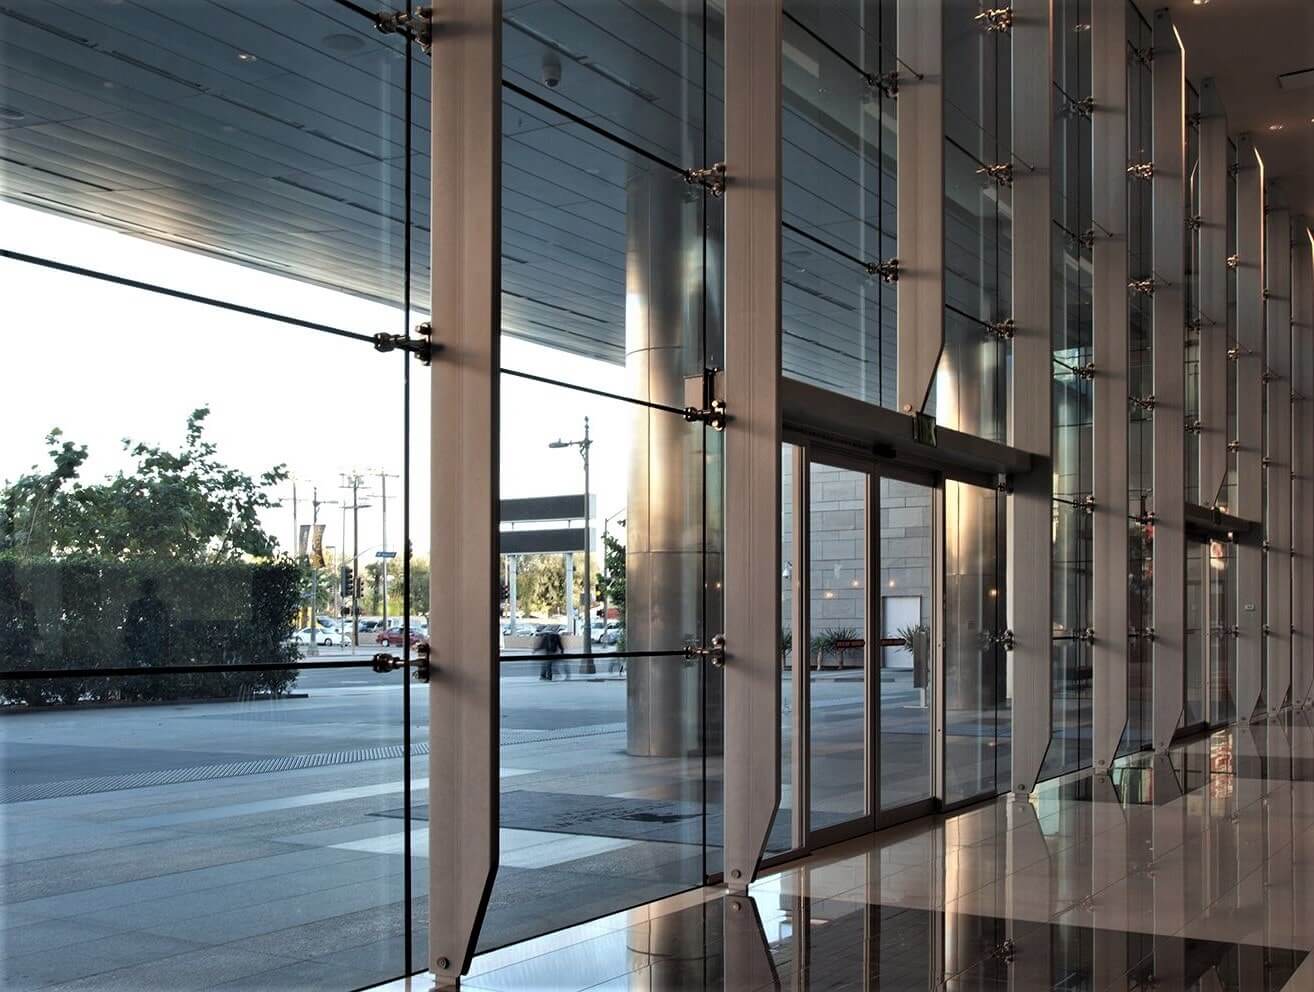 Replace façade with comprehensive Curtain Walling Systems